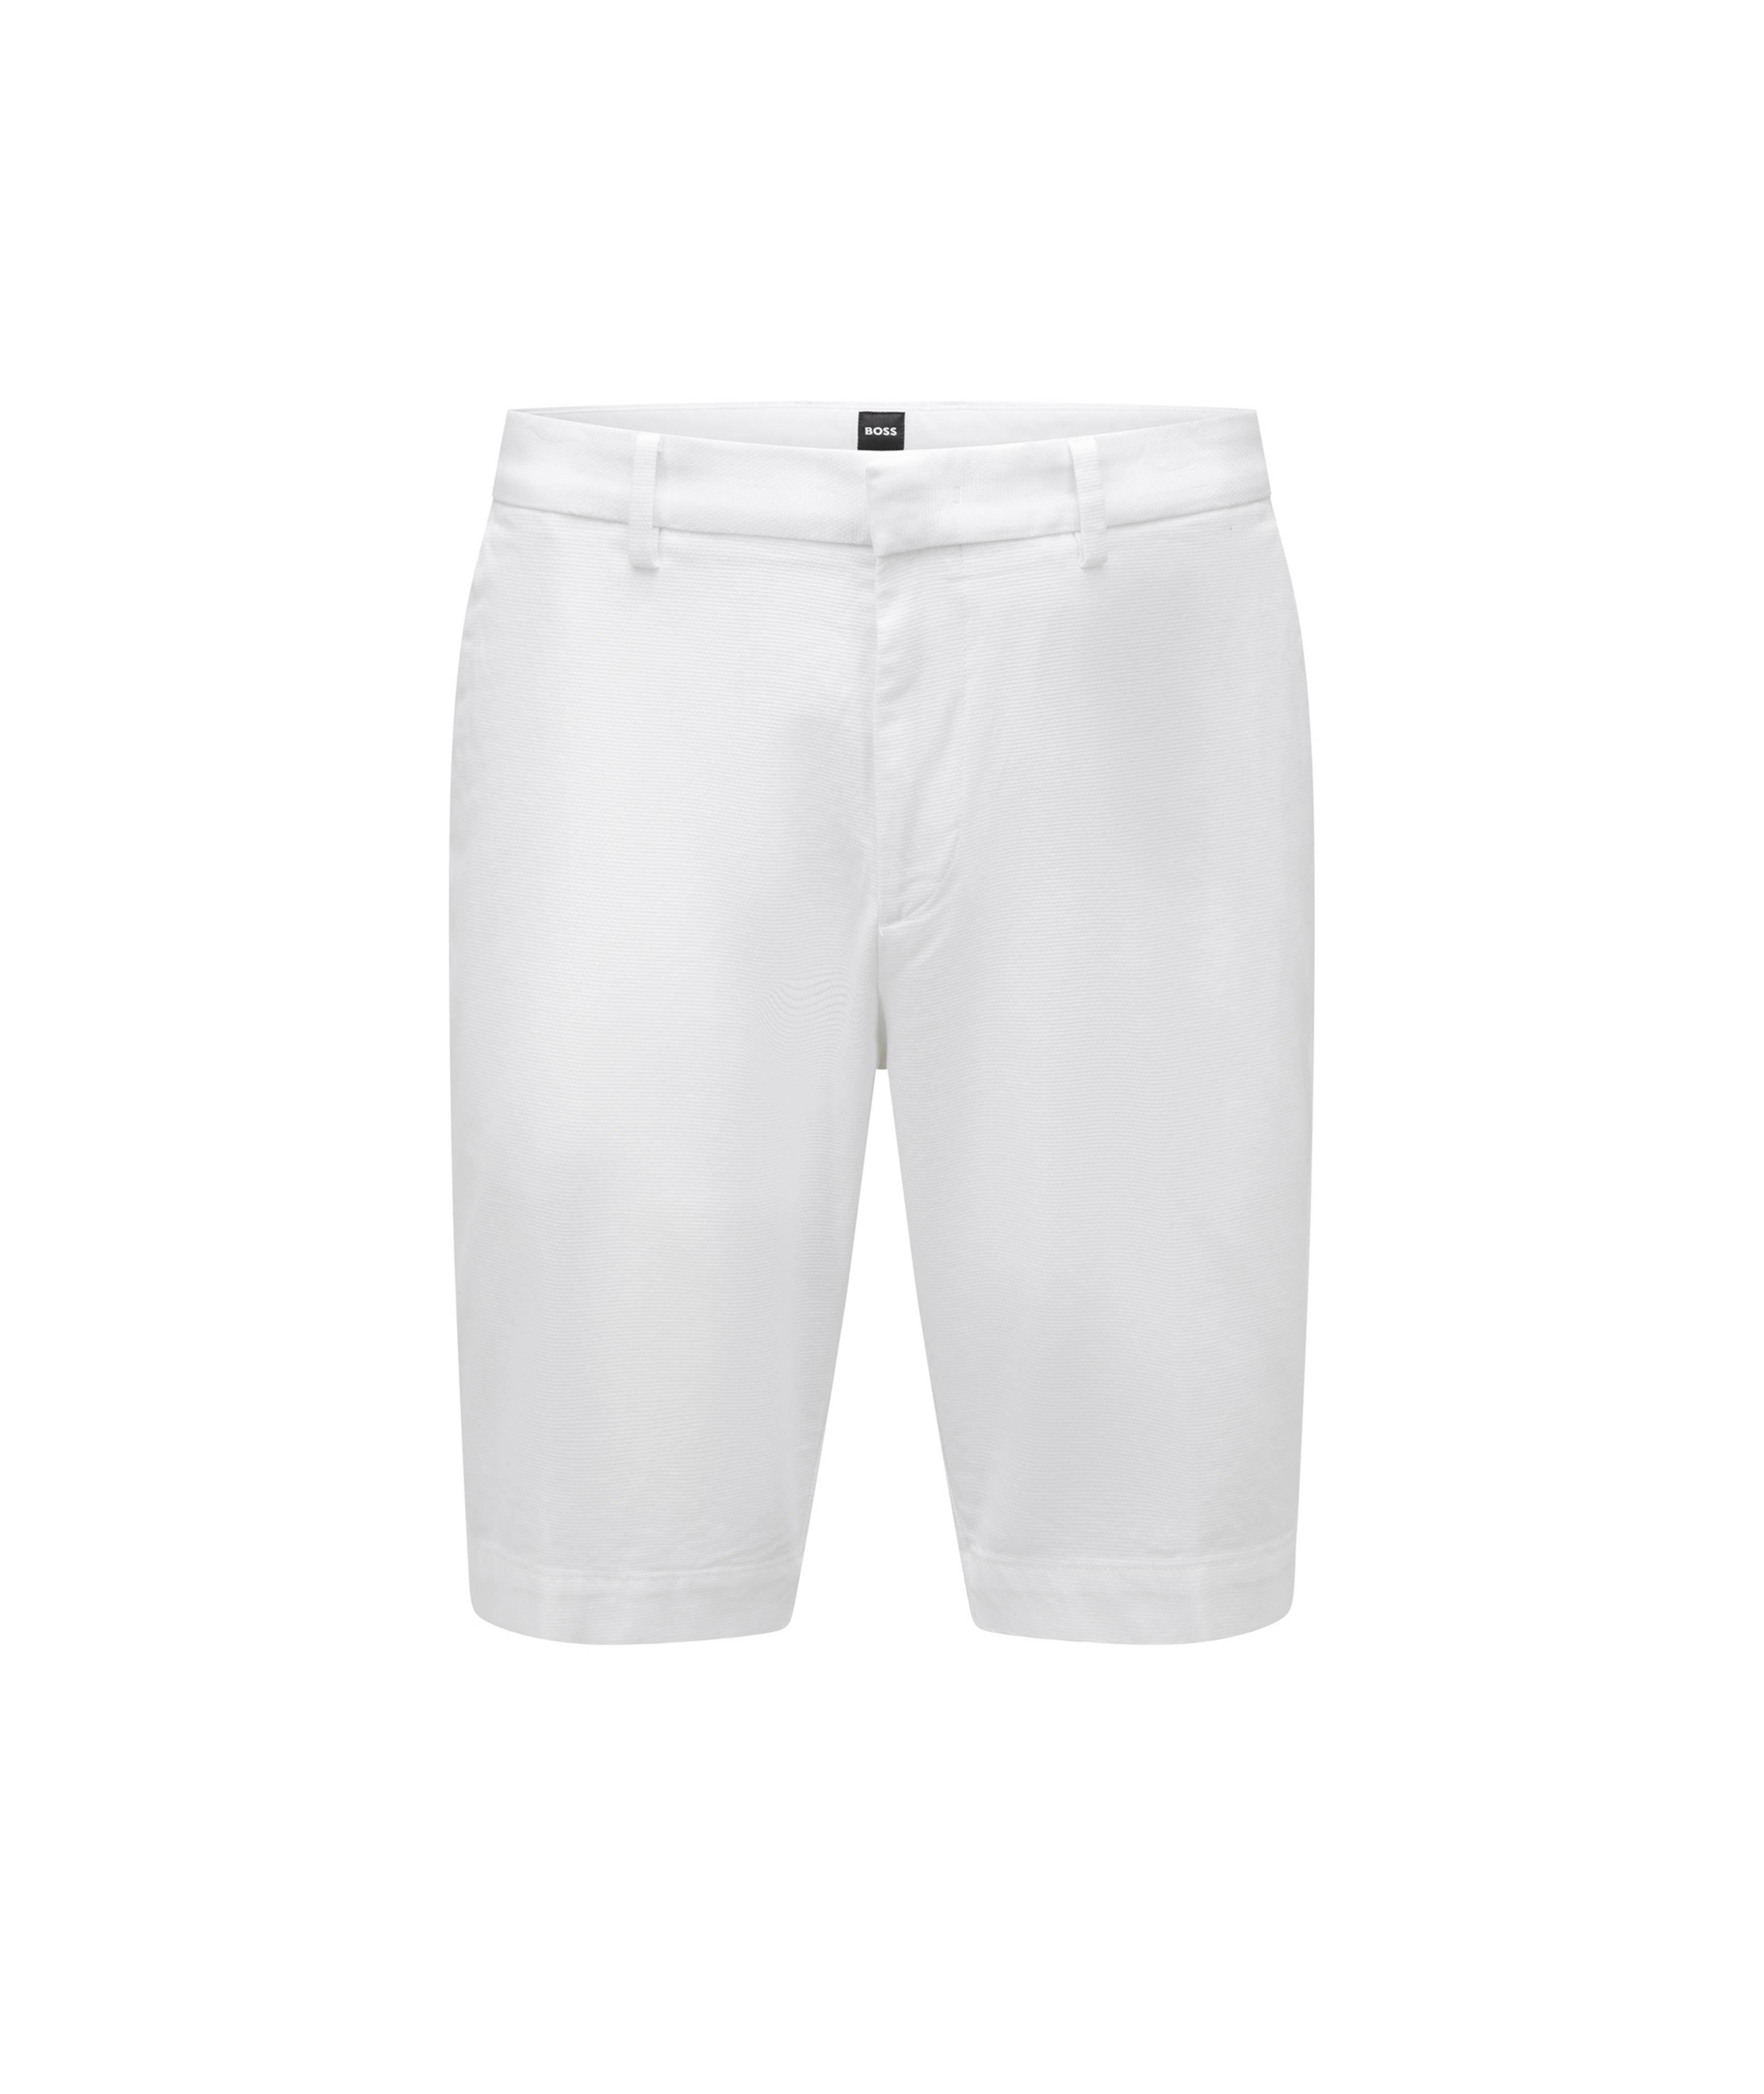 Slim Fit Stretchy Cotton Shorts  image 0